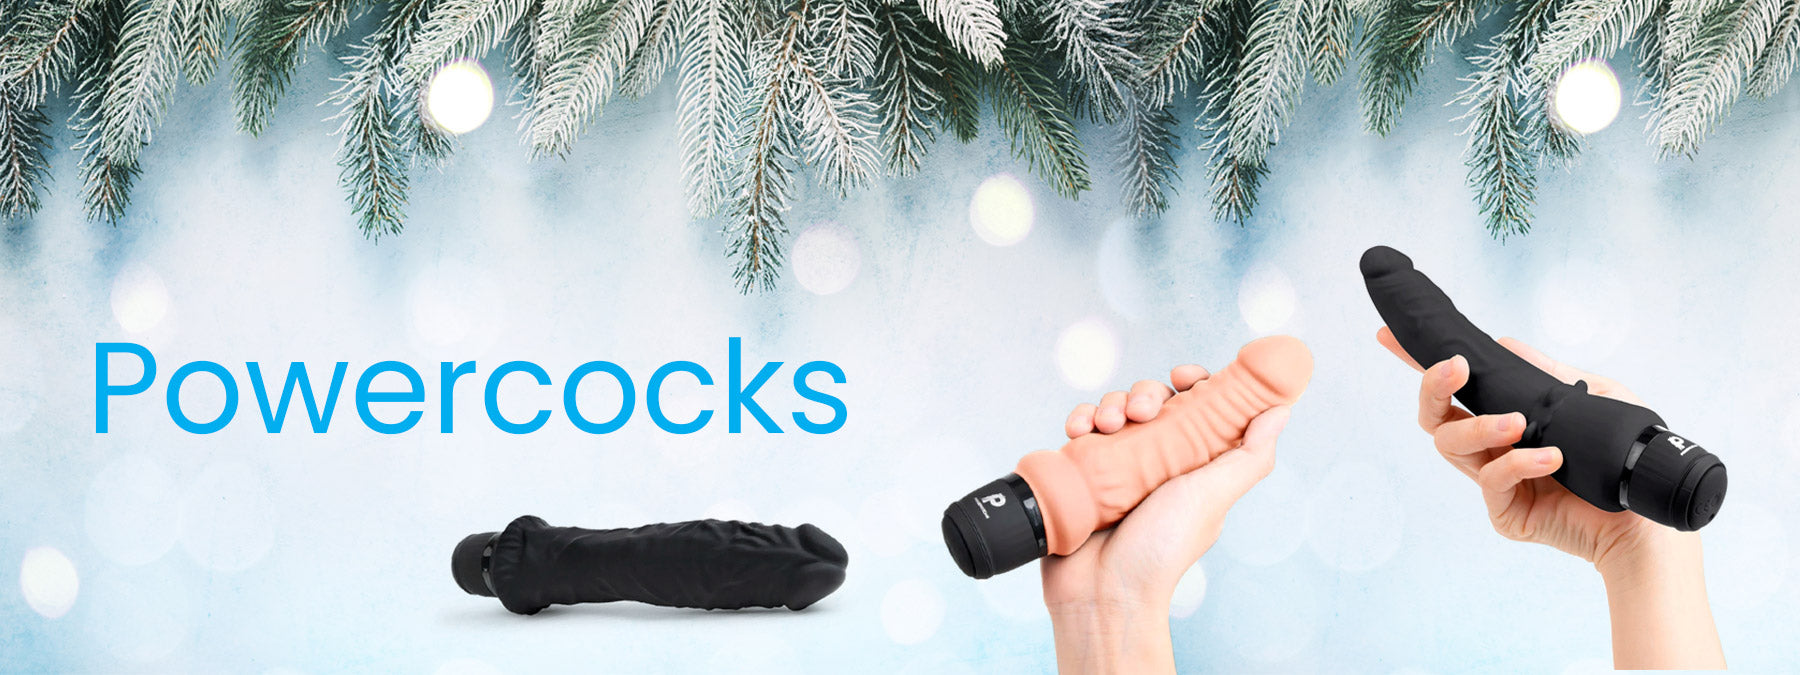 Powercocks Vibrators - Sex Toy Gift Guide 2022 by Gläs